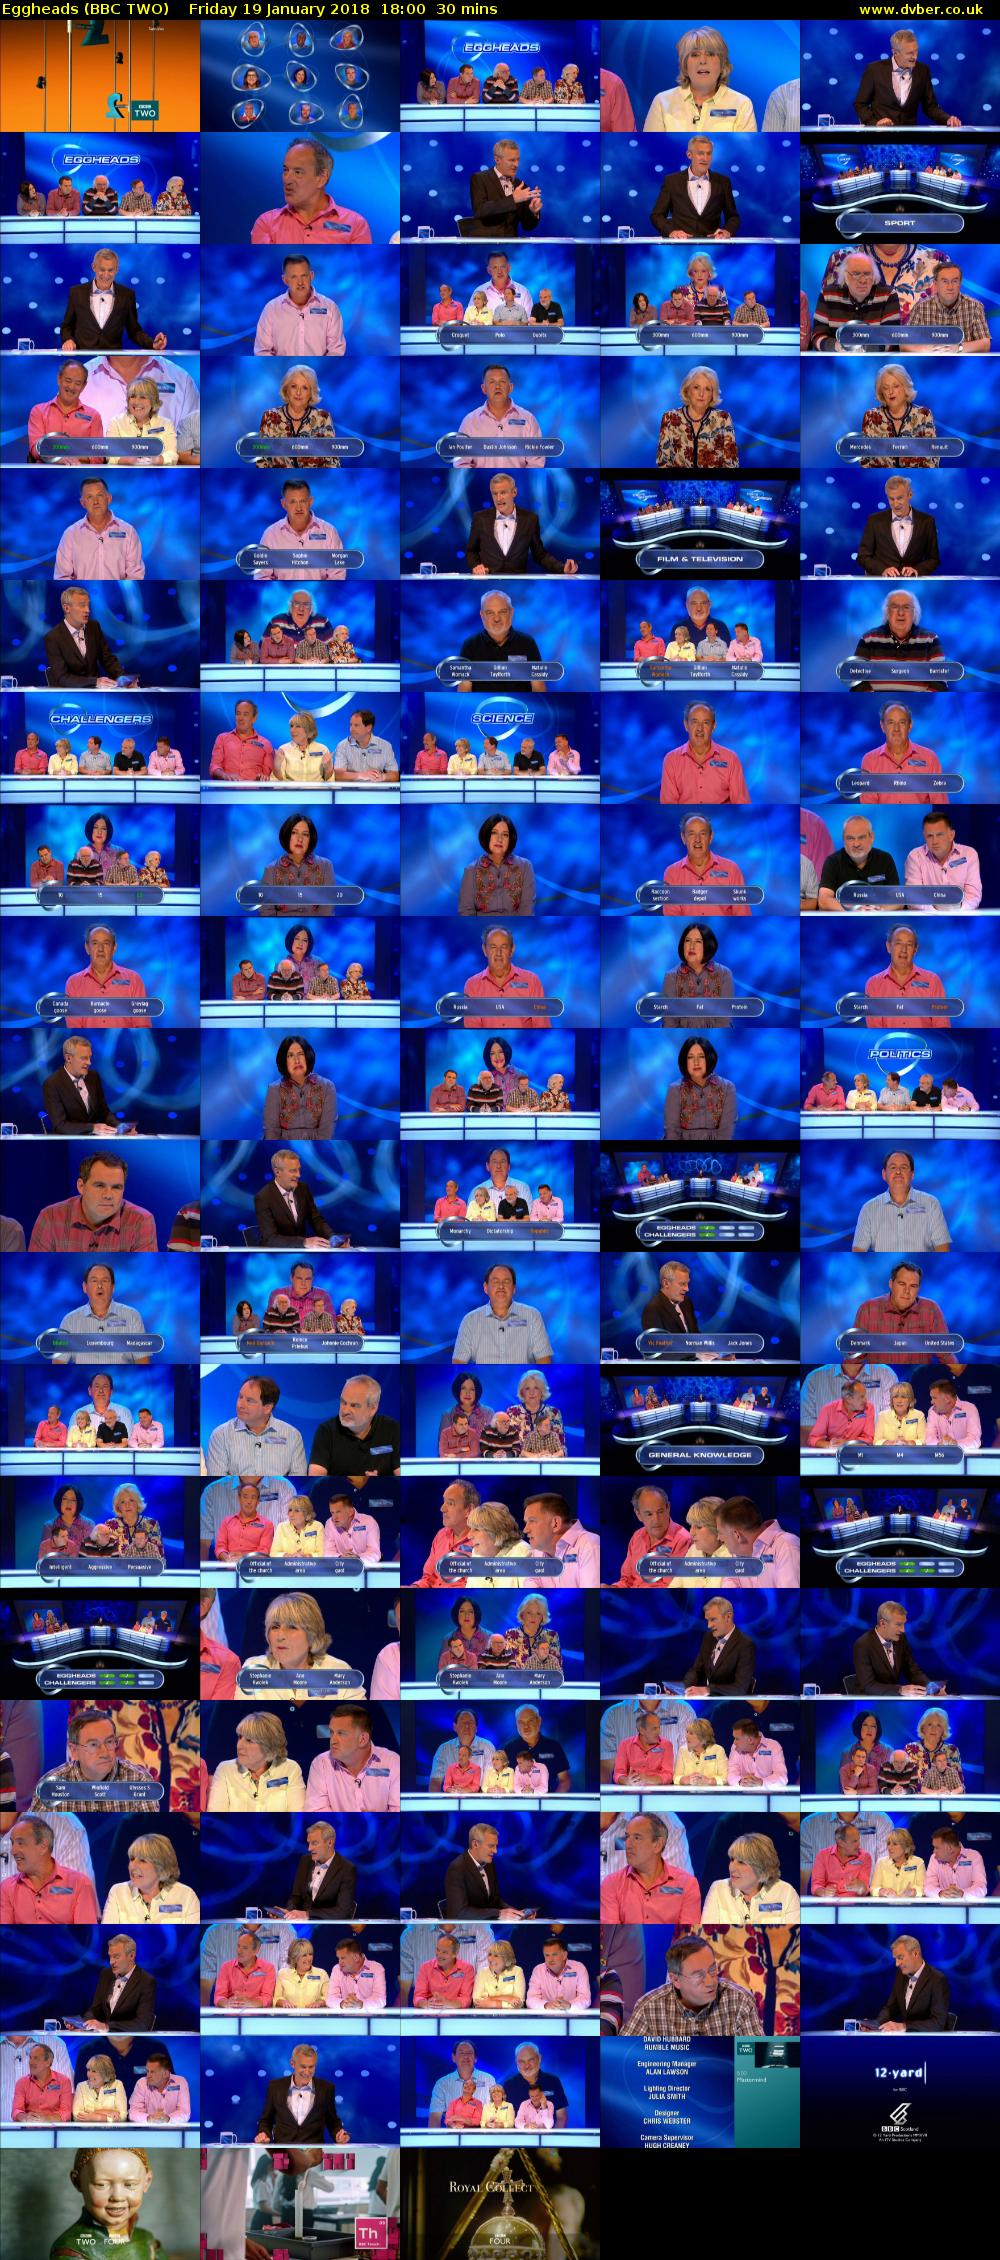 Eggheads (BBC TWO) Friday 19 January 2018 18:00 - 18:30